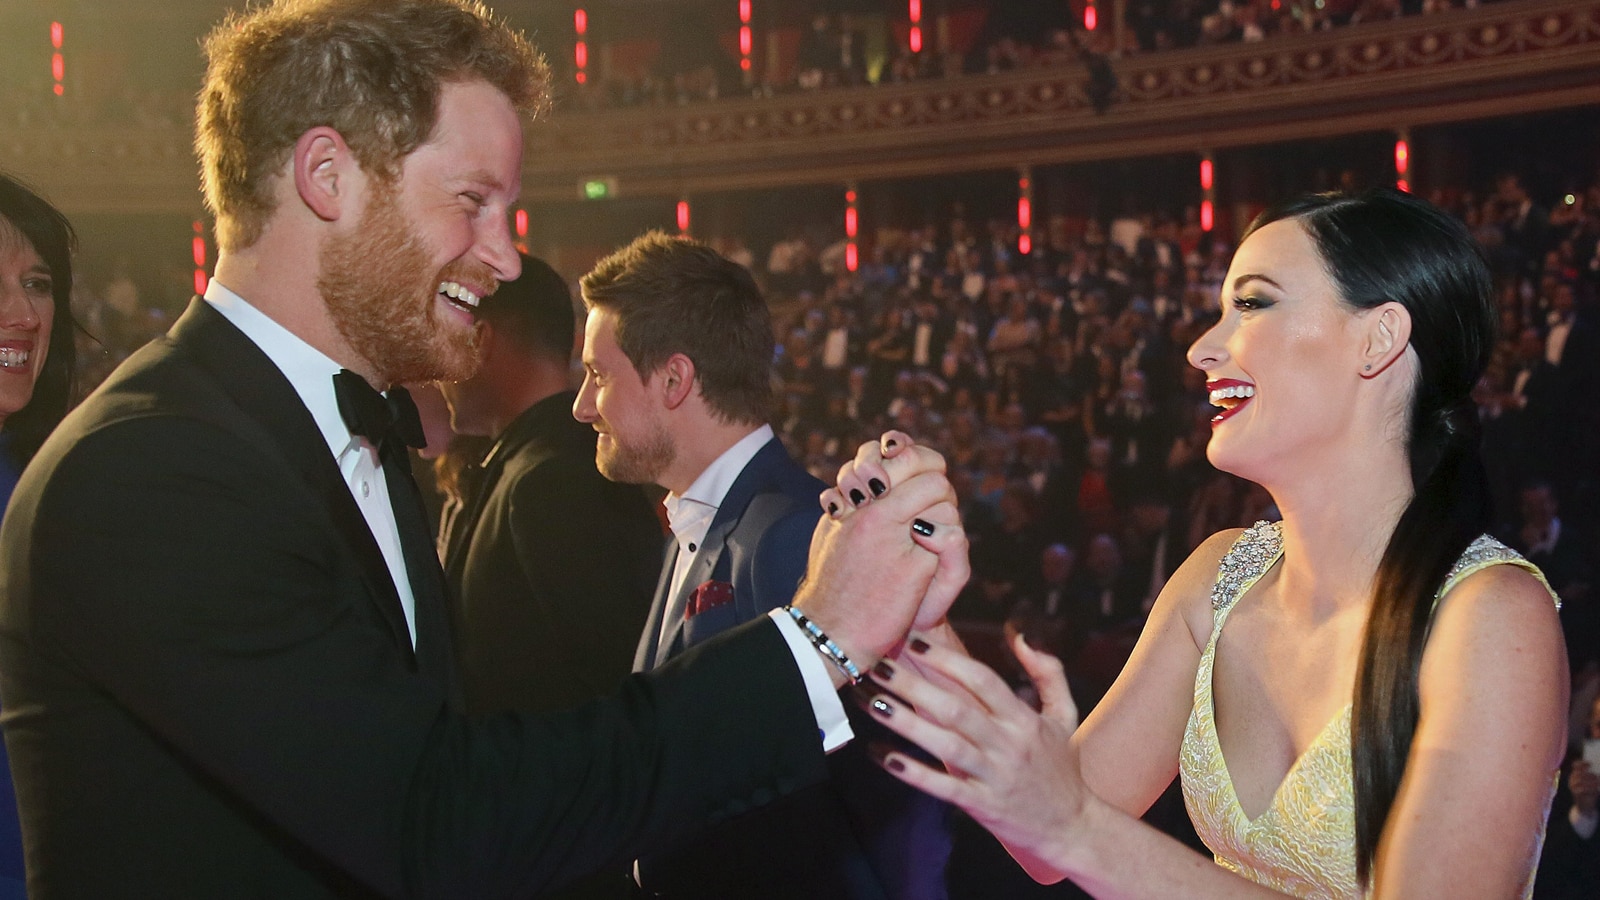 180309_3681389_Kacey_Musgraves_High_fived_Prince_Harry___Br